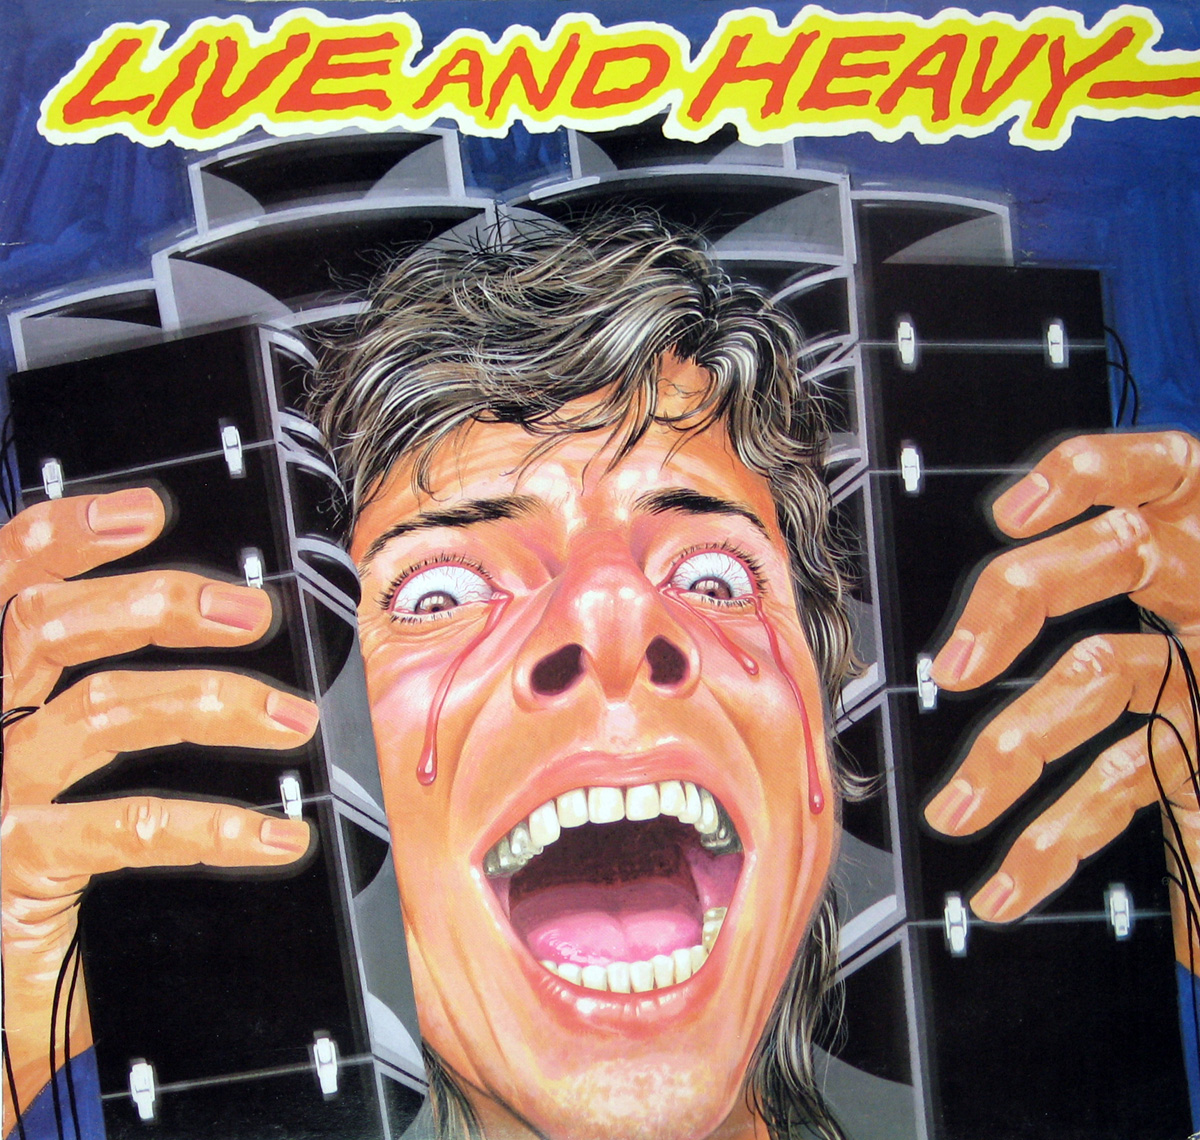 Front Cover Photo Of VARIOUS ARTISTS - Live and Heavy 12" Vinyl LP Album